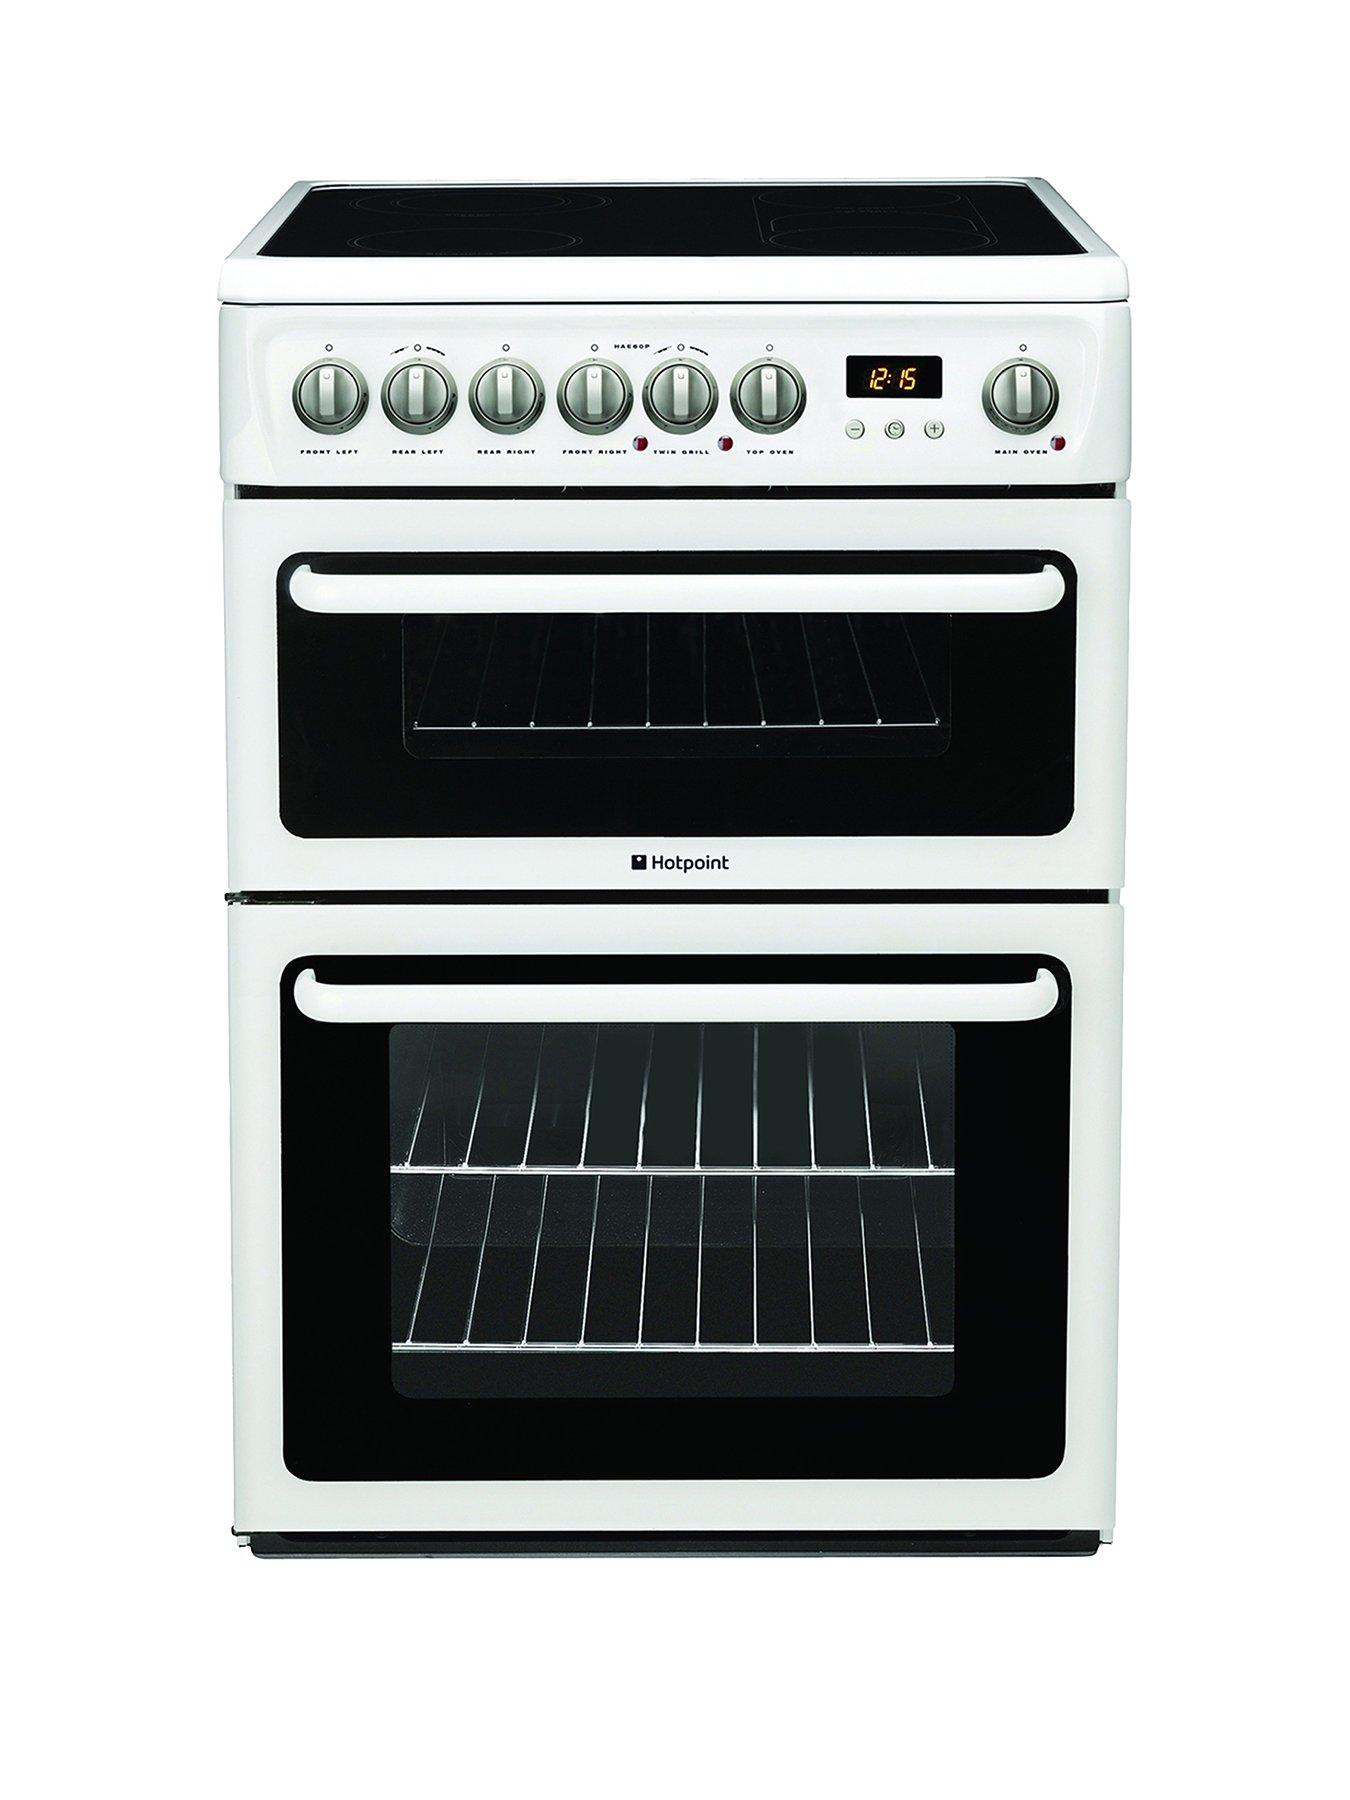 cheap electric cookers 60cm wide